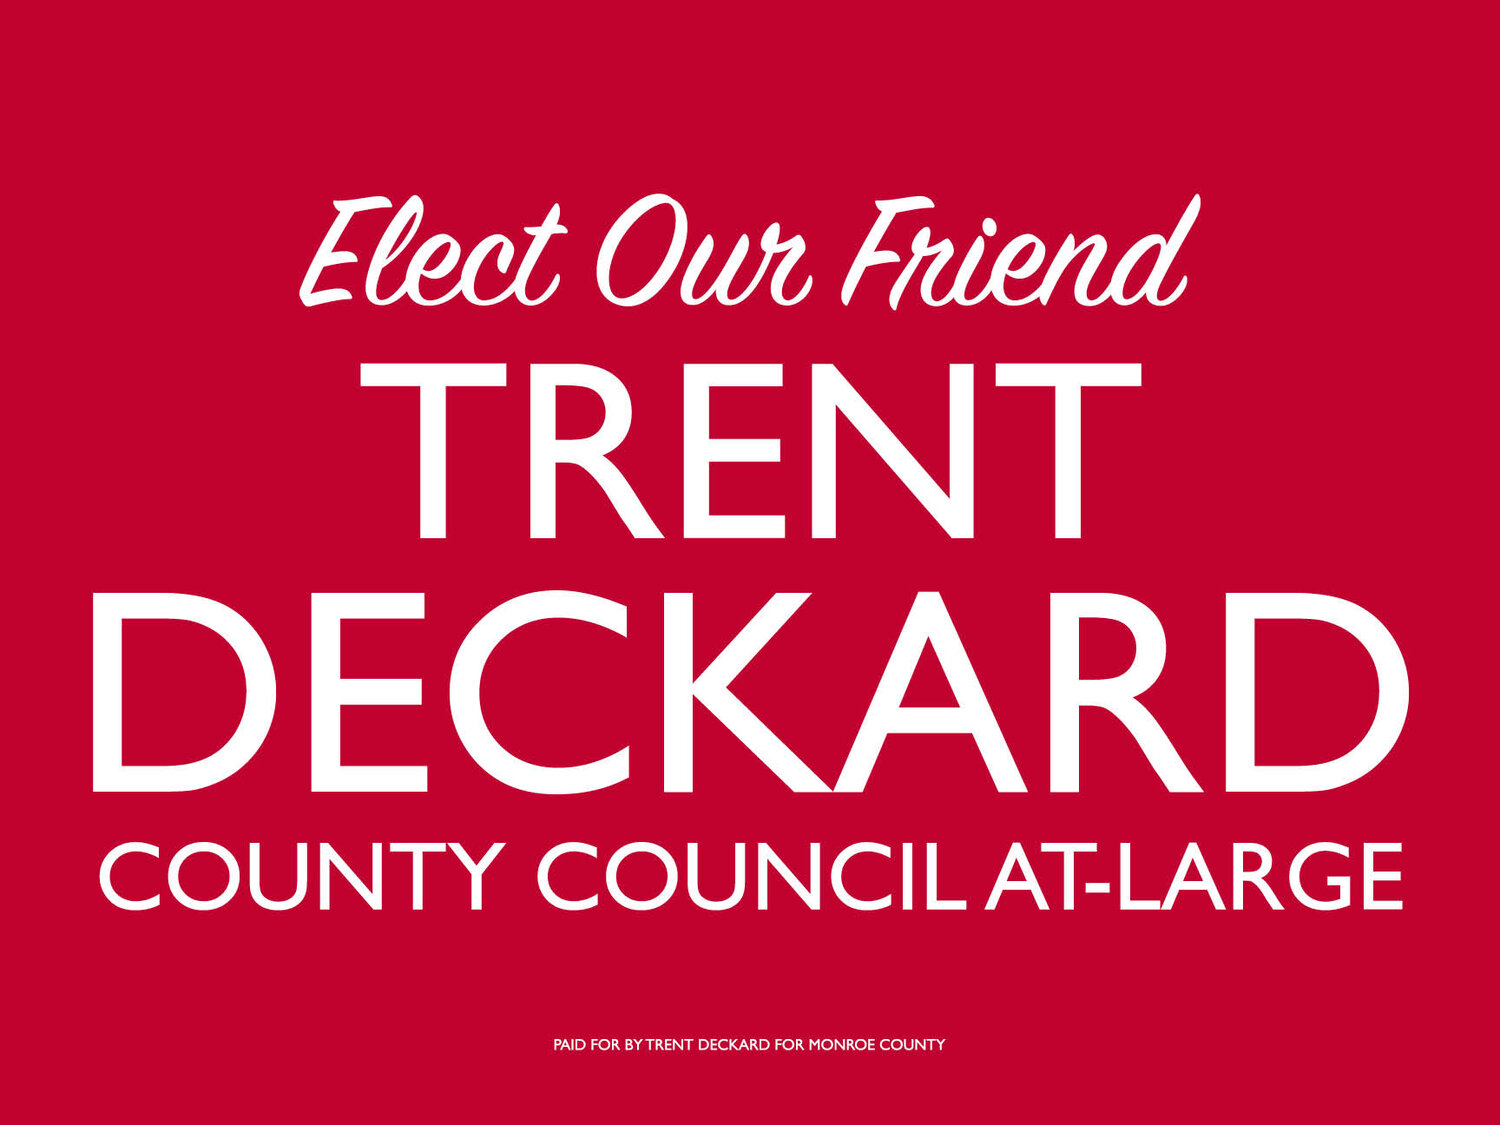 Trent Deckard for County Council At-Large